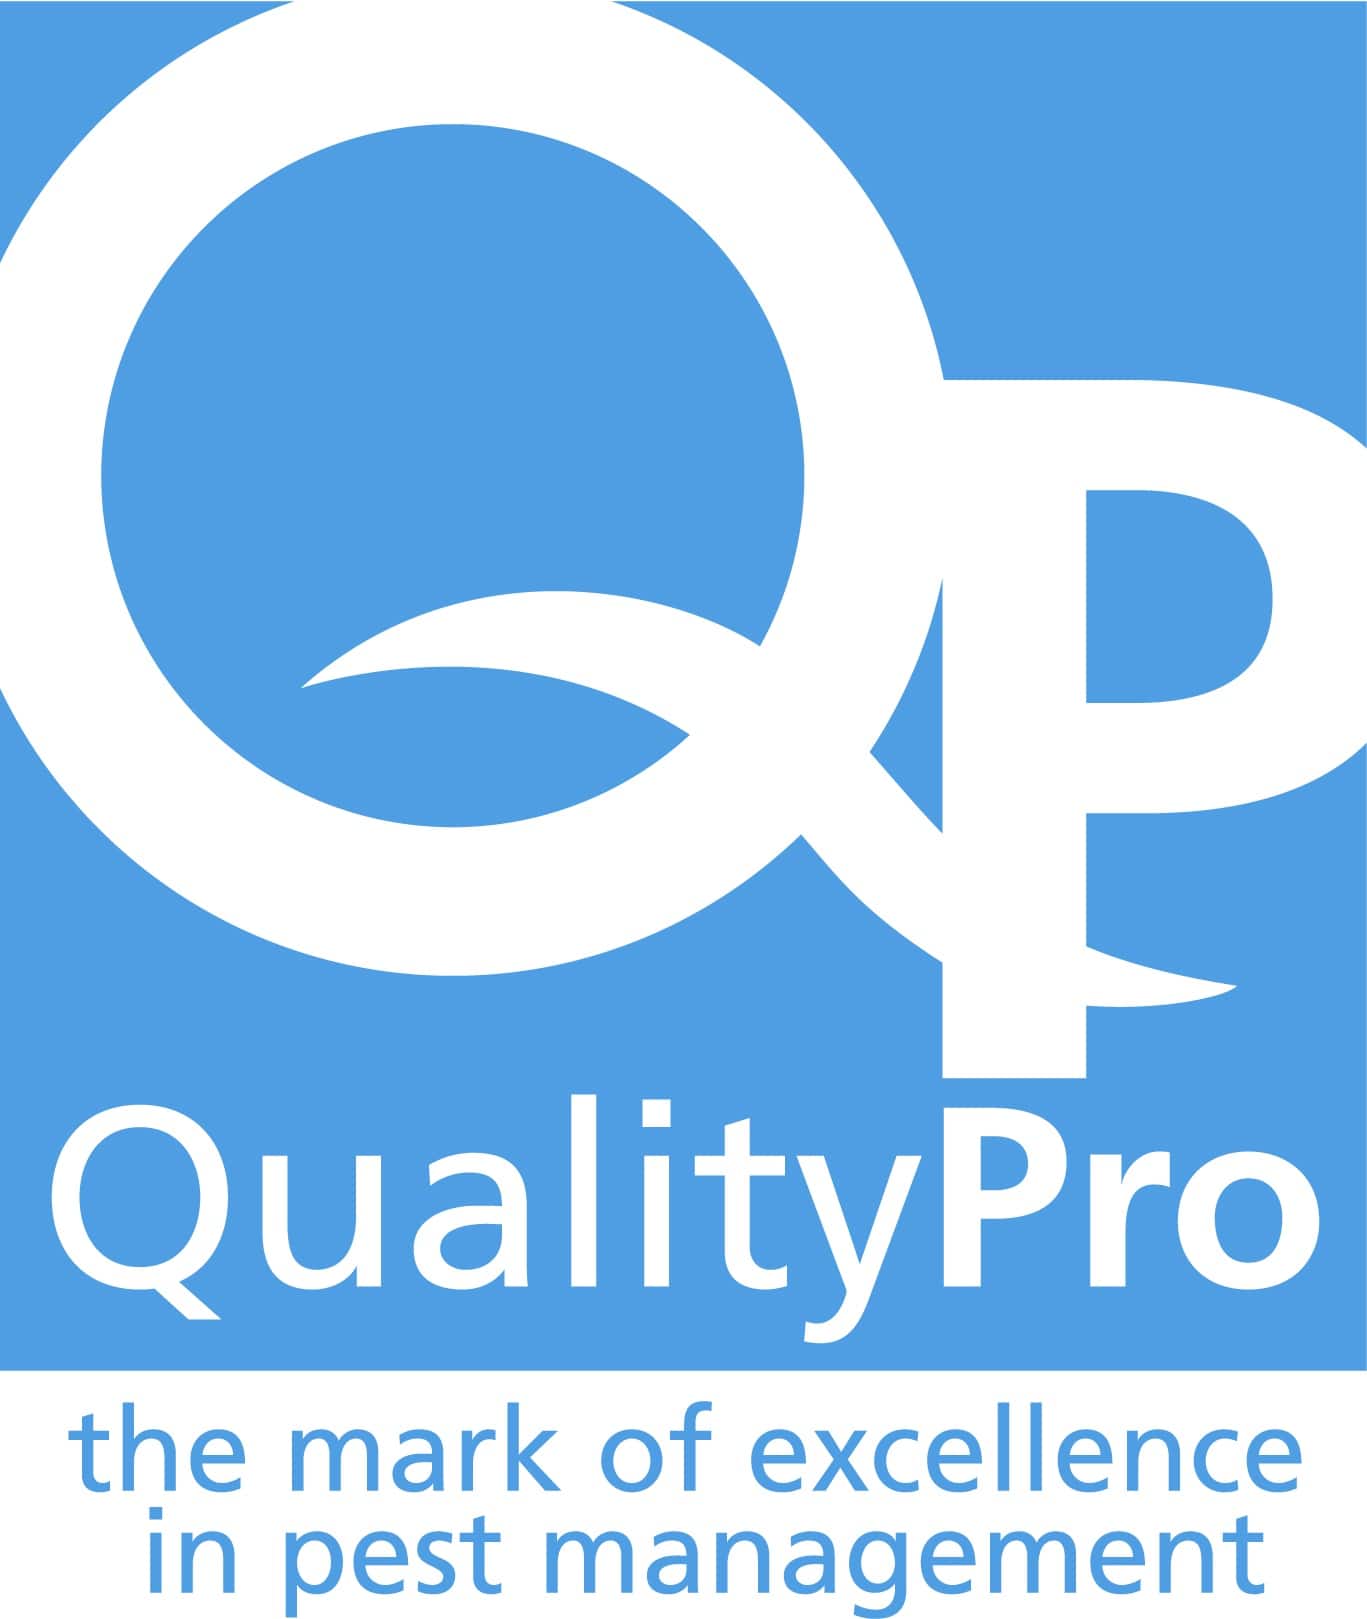 Quality Pro Certified Pest Control in Jacksonville